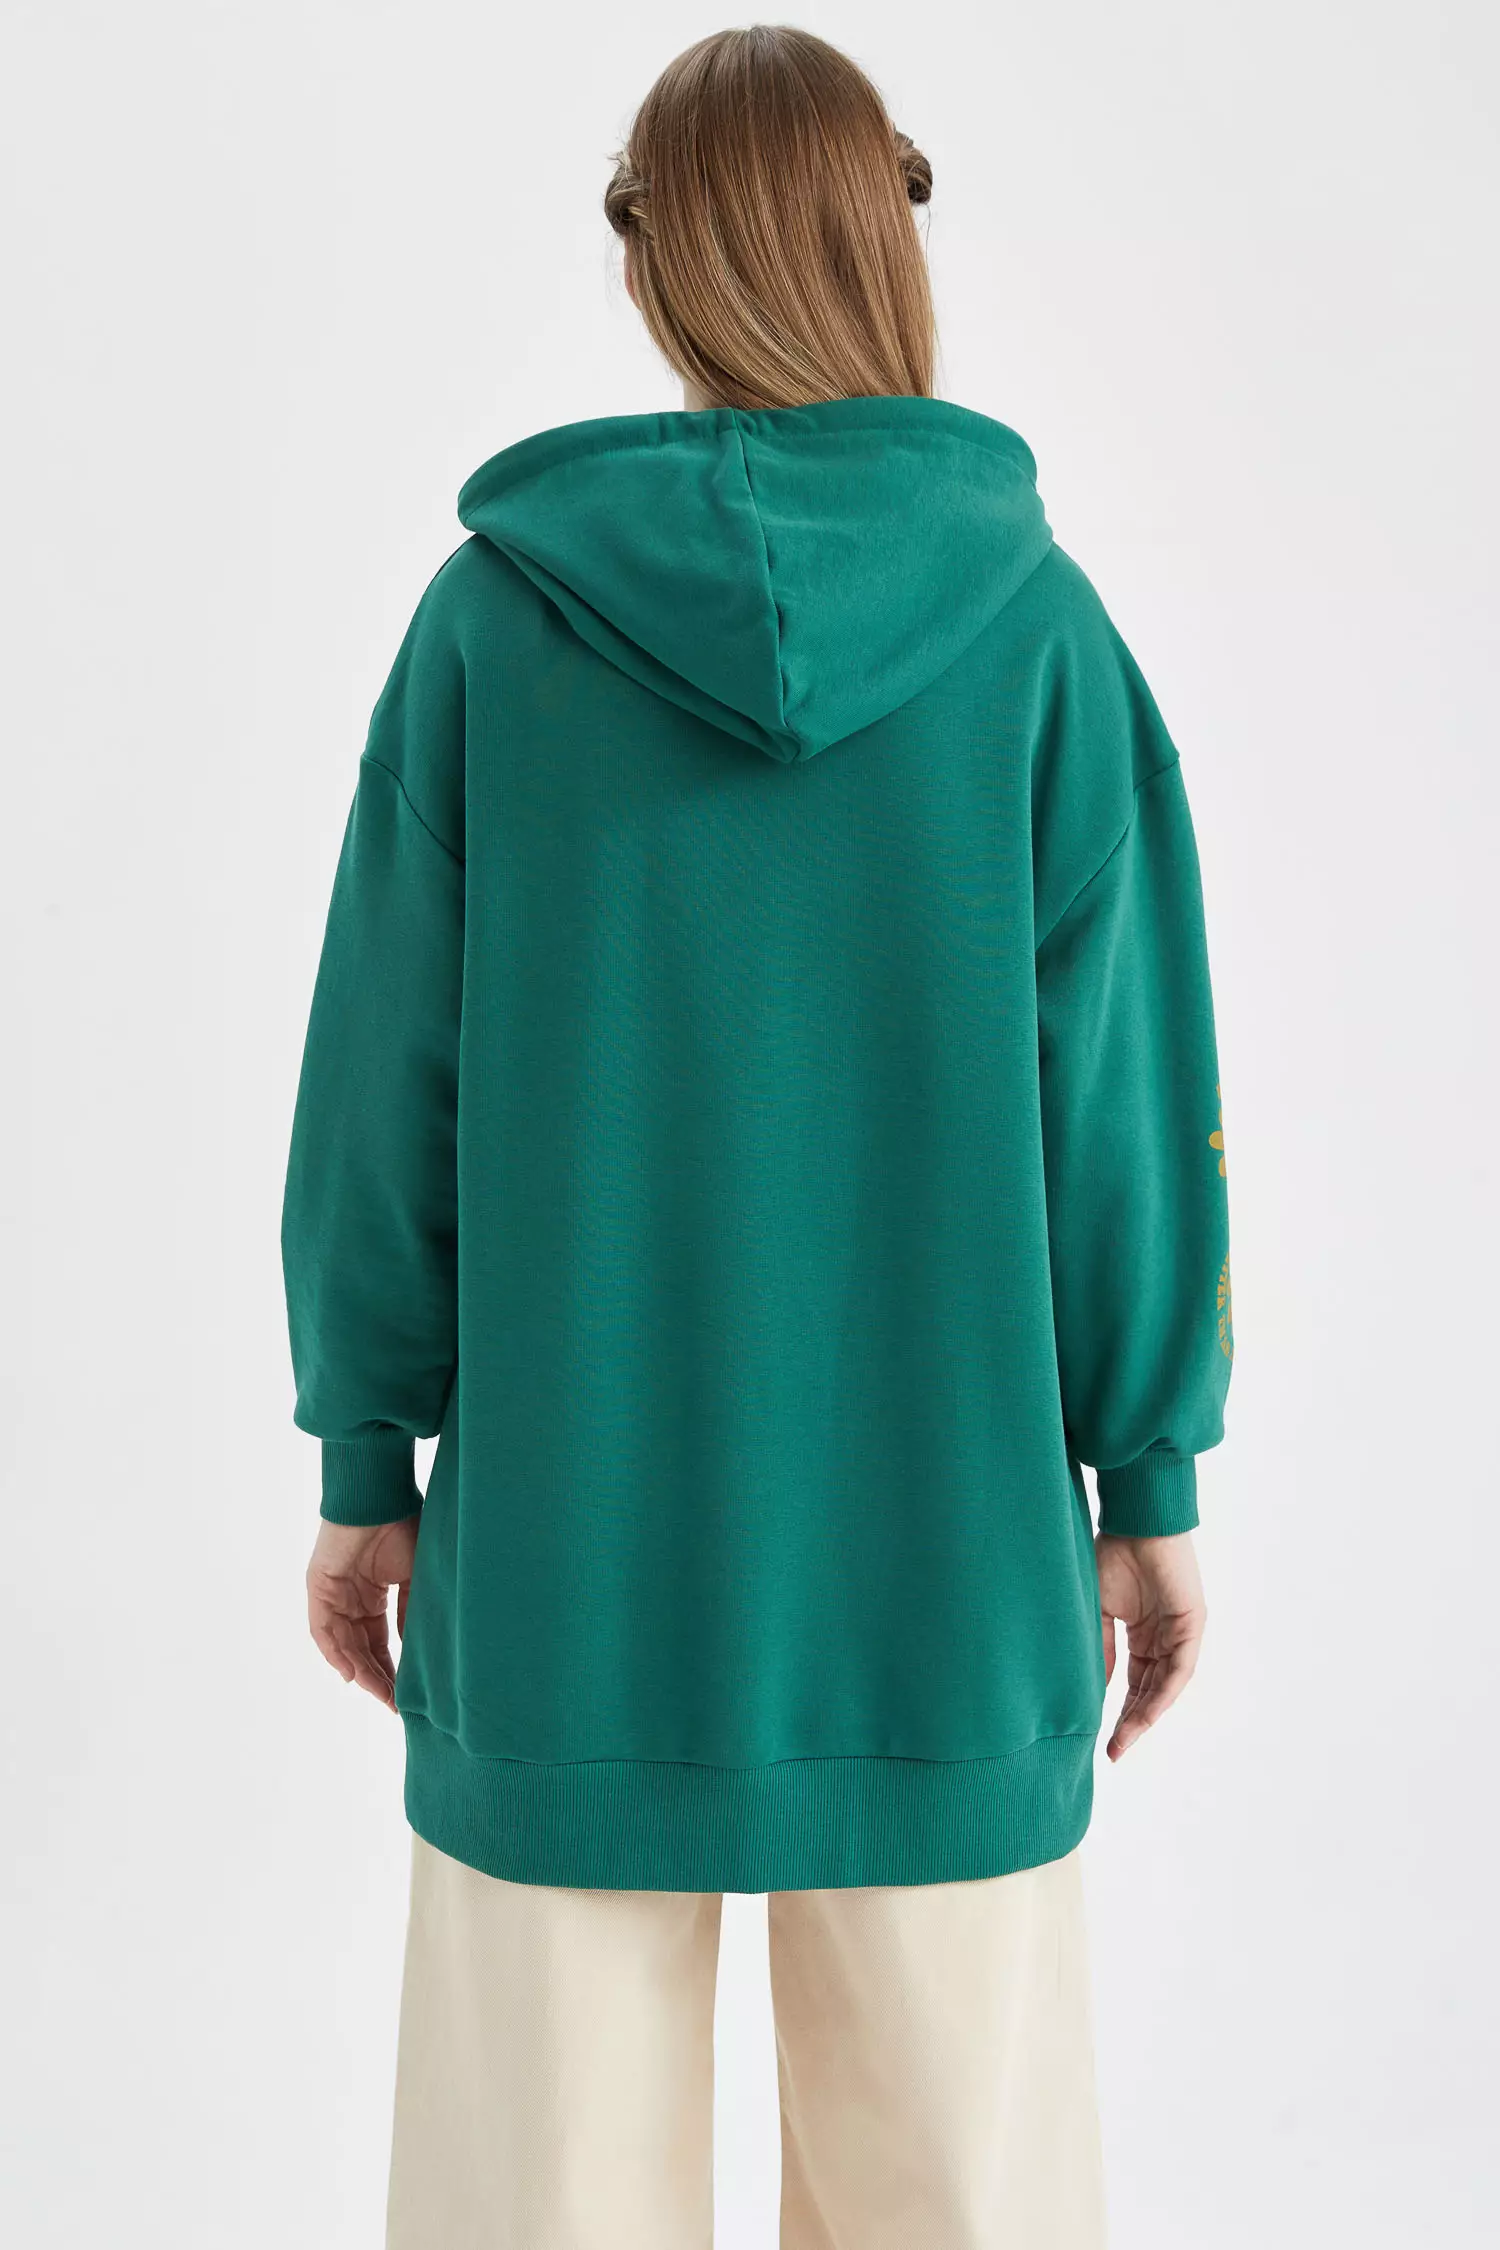 Green WOMAN Relax Fit Hooded Sweatshirt Tunic 2716648 | DeFacto